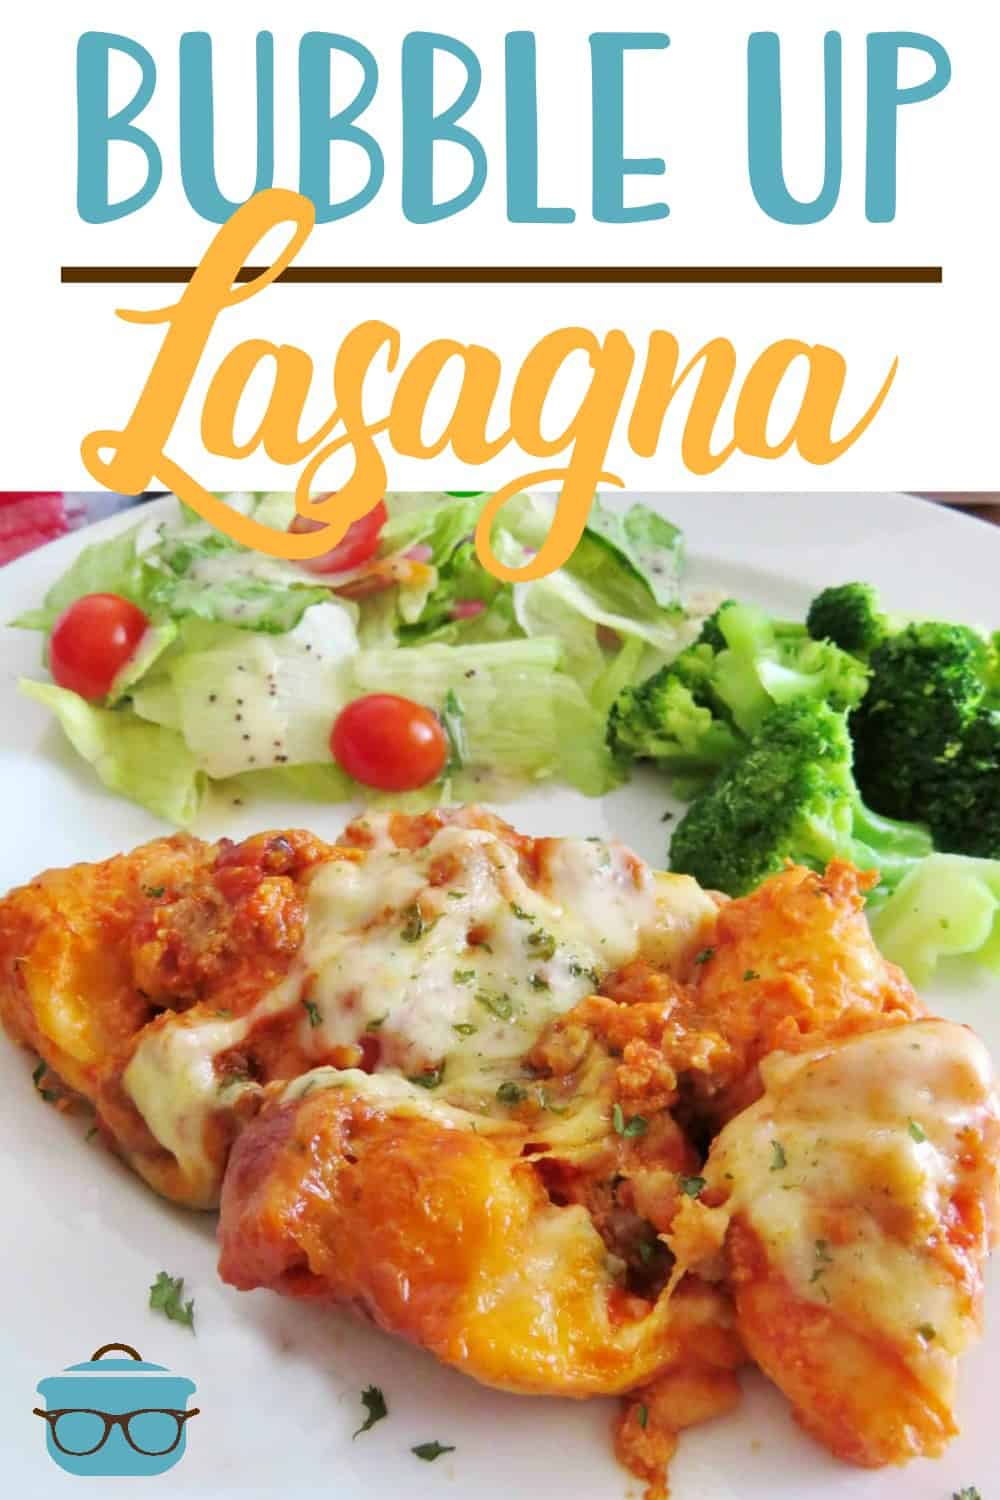 Easy Bubble Up Lasagna recipe from The Country Cook